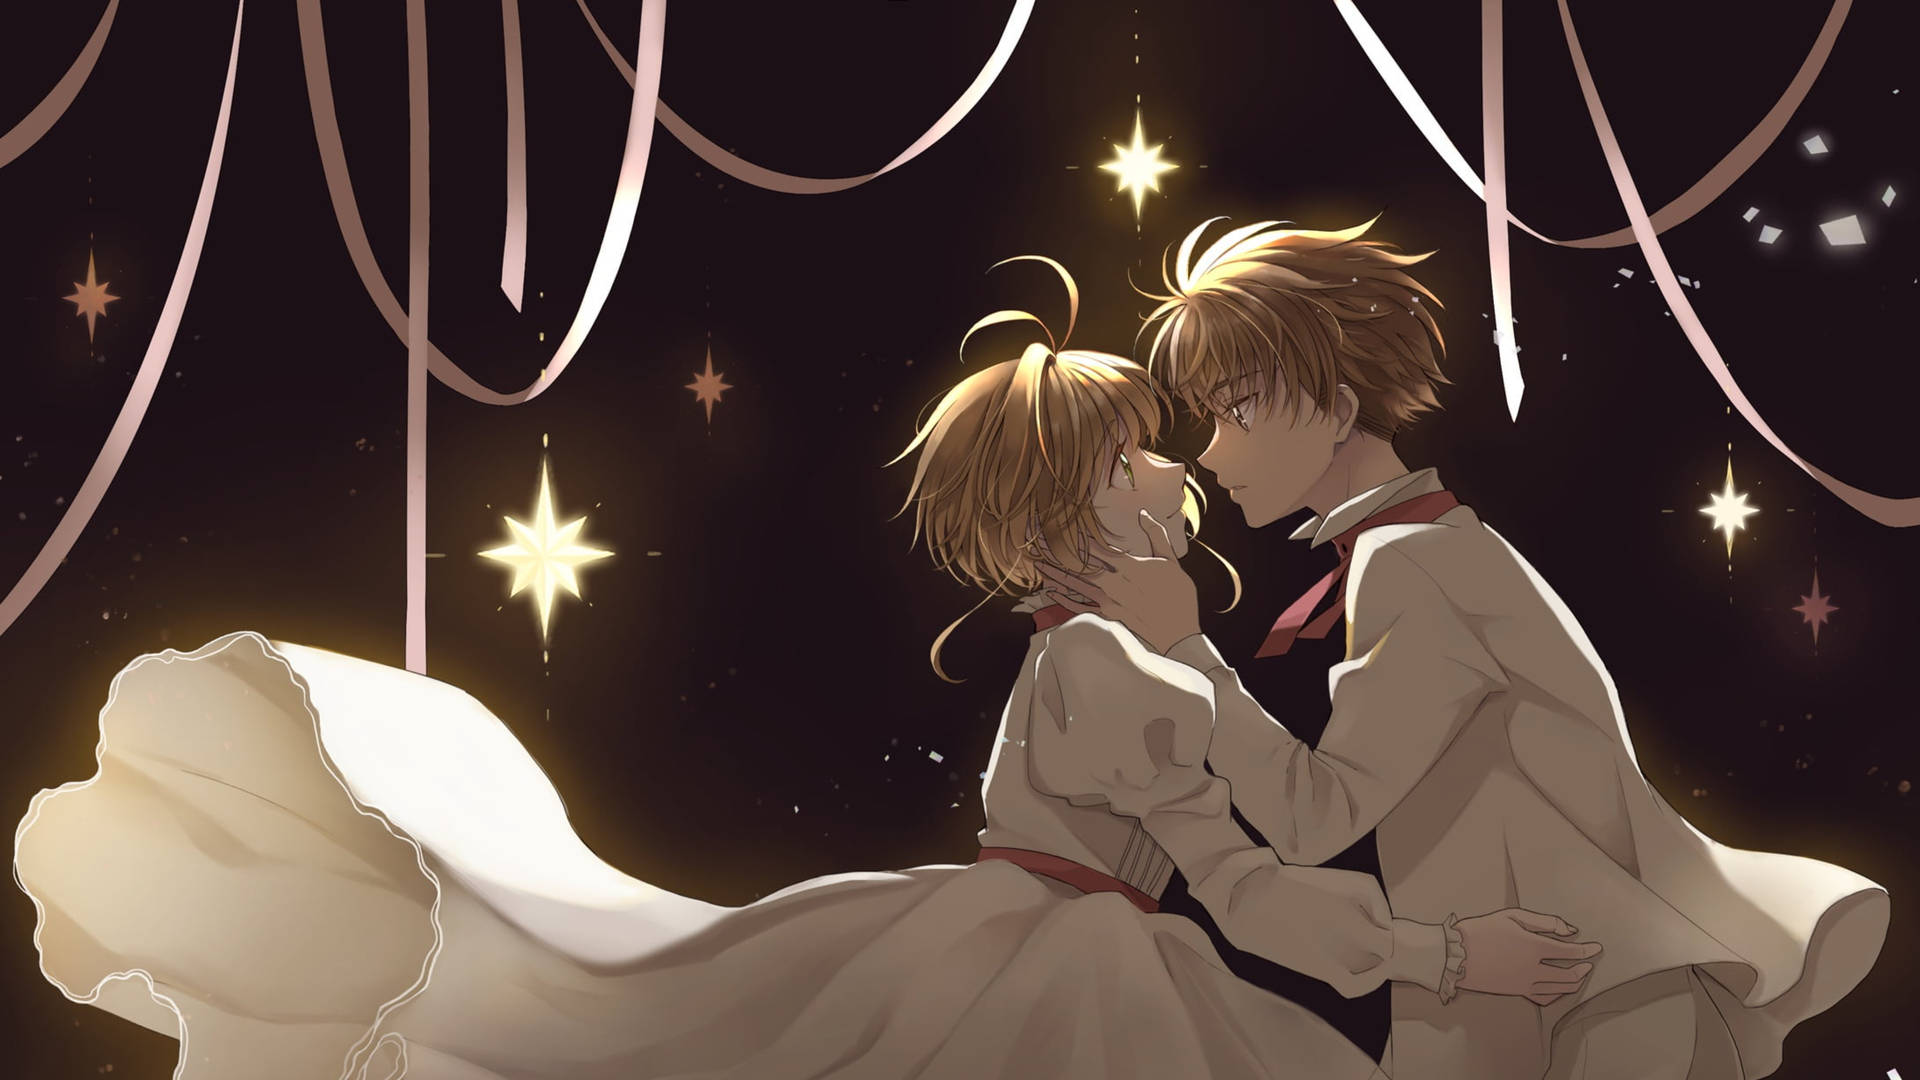 Cute Anime Couple With Ribbons Background